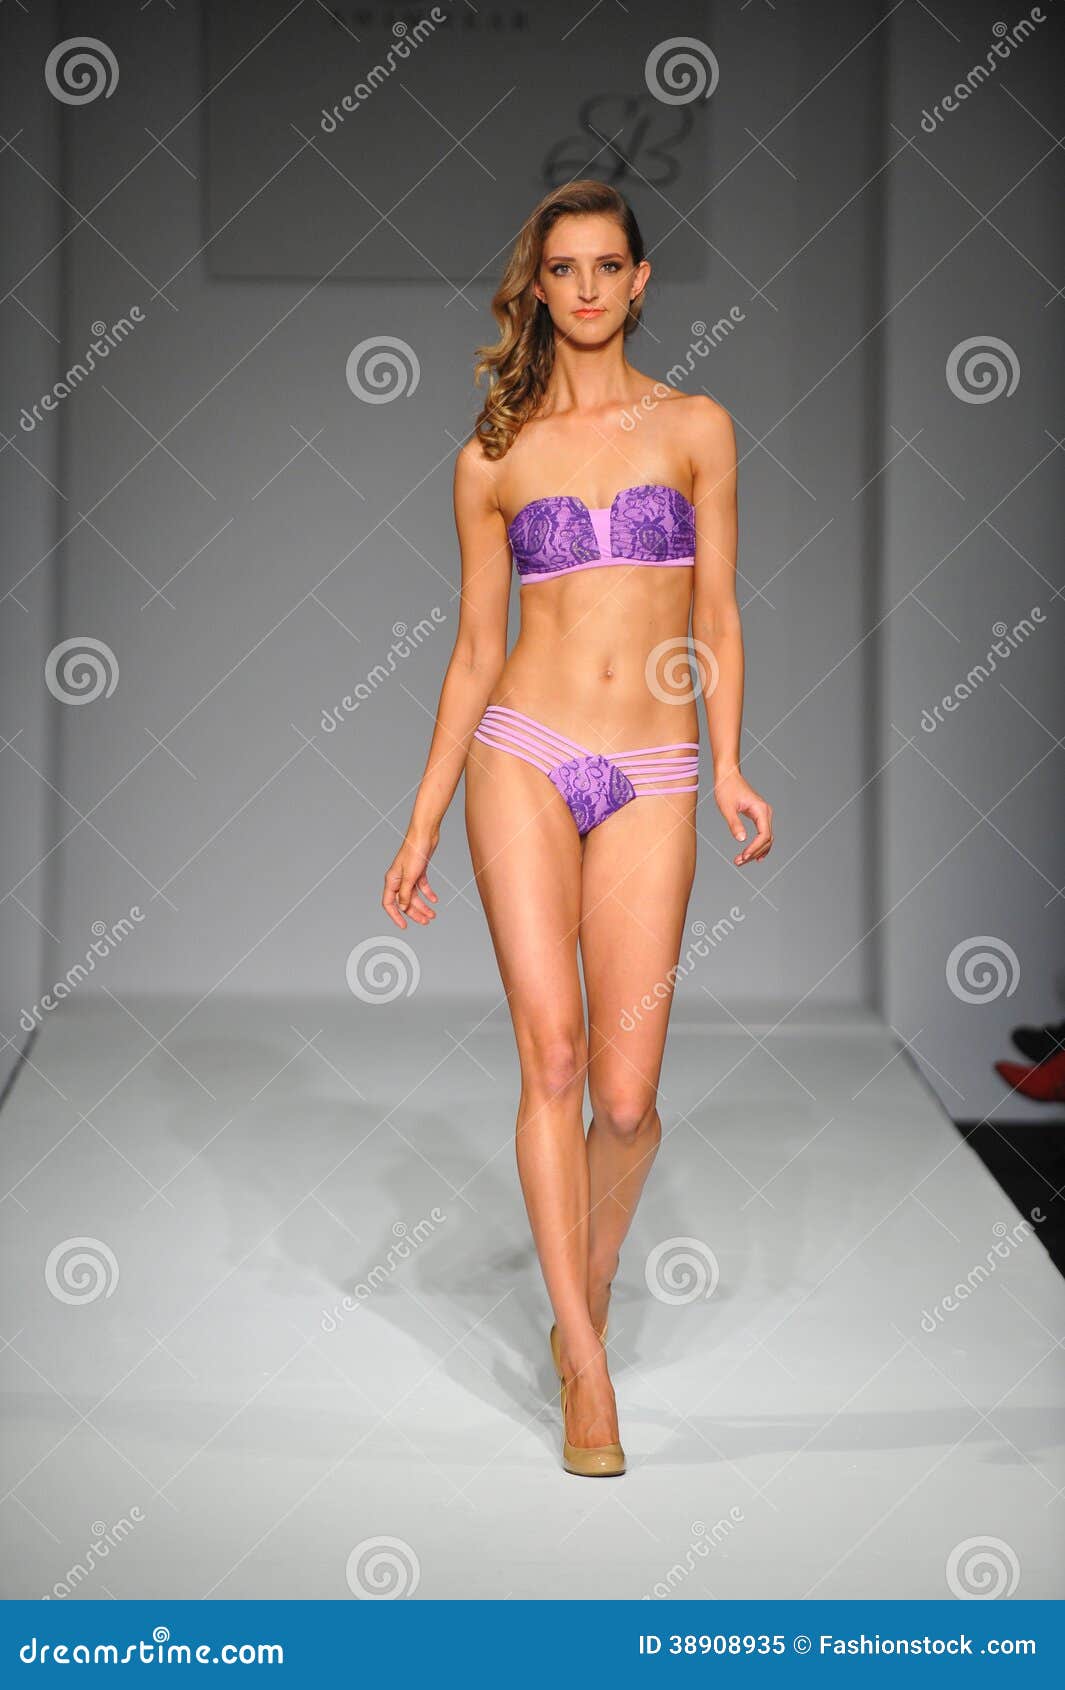 Skinny Catwalk Photos - Free & Royalty-Free Stock Photos from Dreamstime